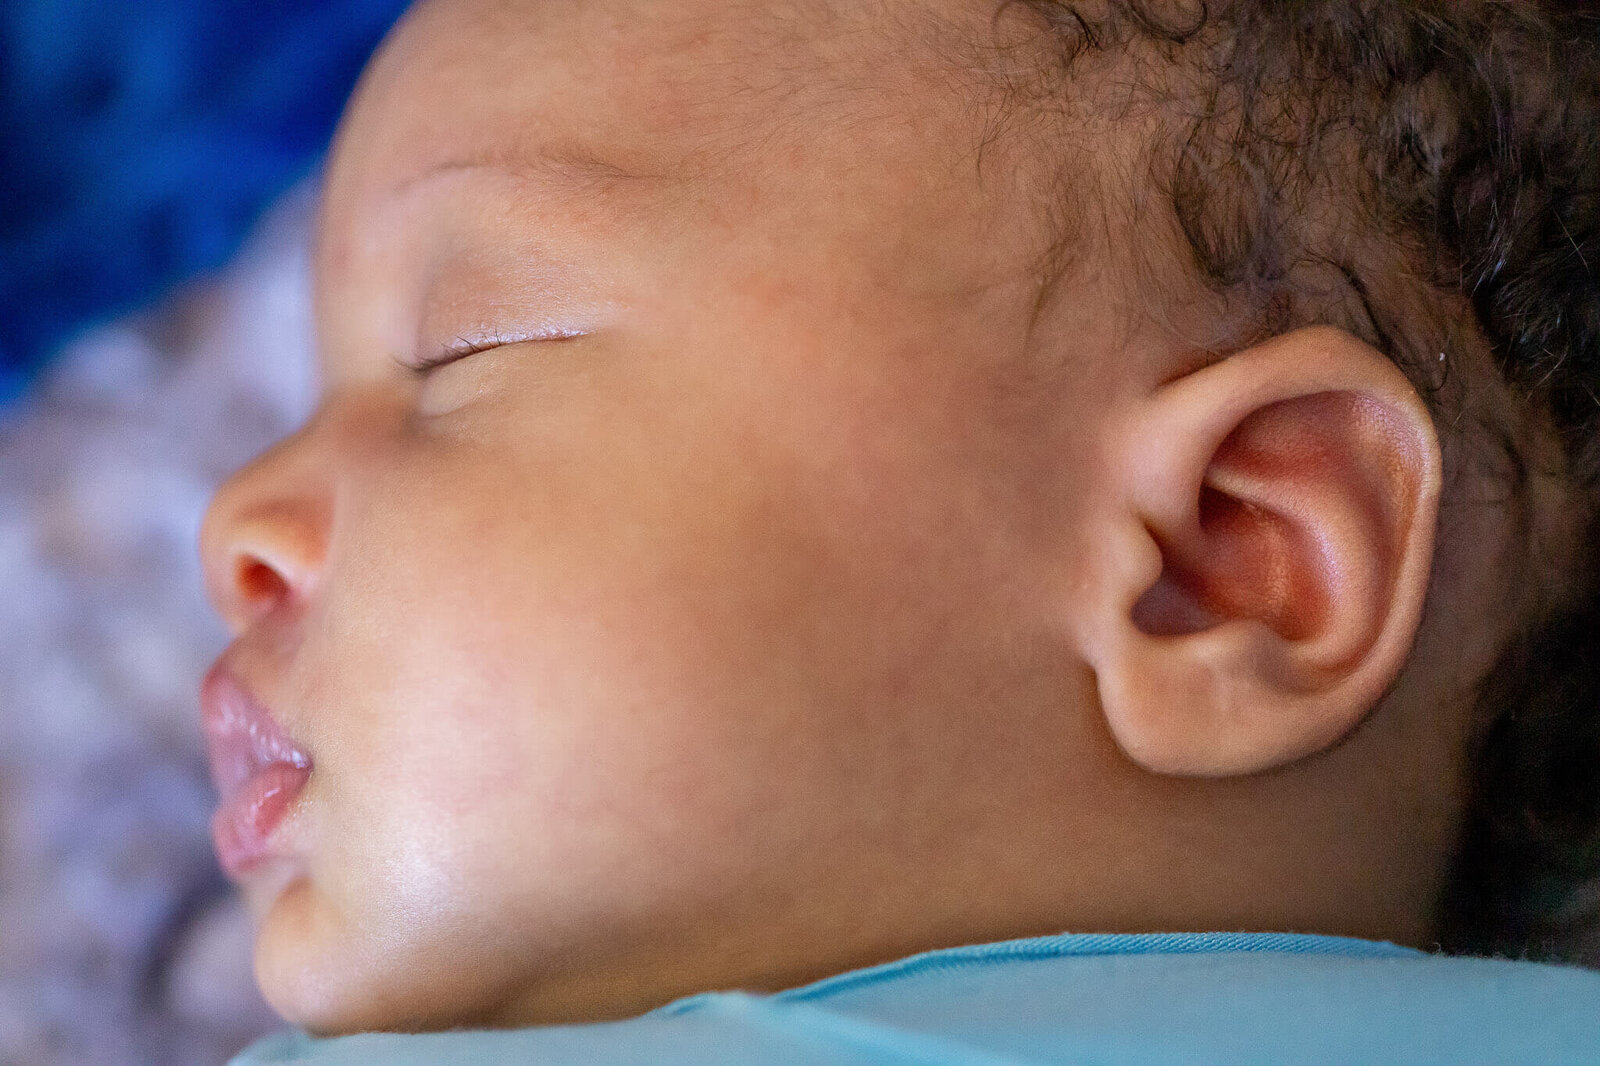 A close-up of a baby boy's face and ear during his Woodbridge newborn photo session.